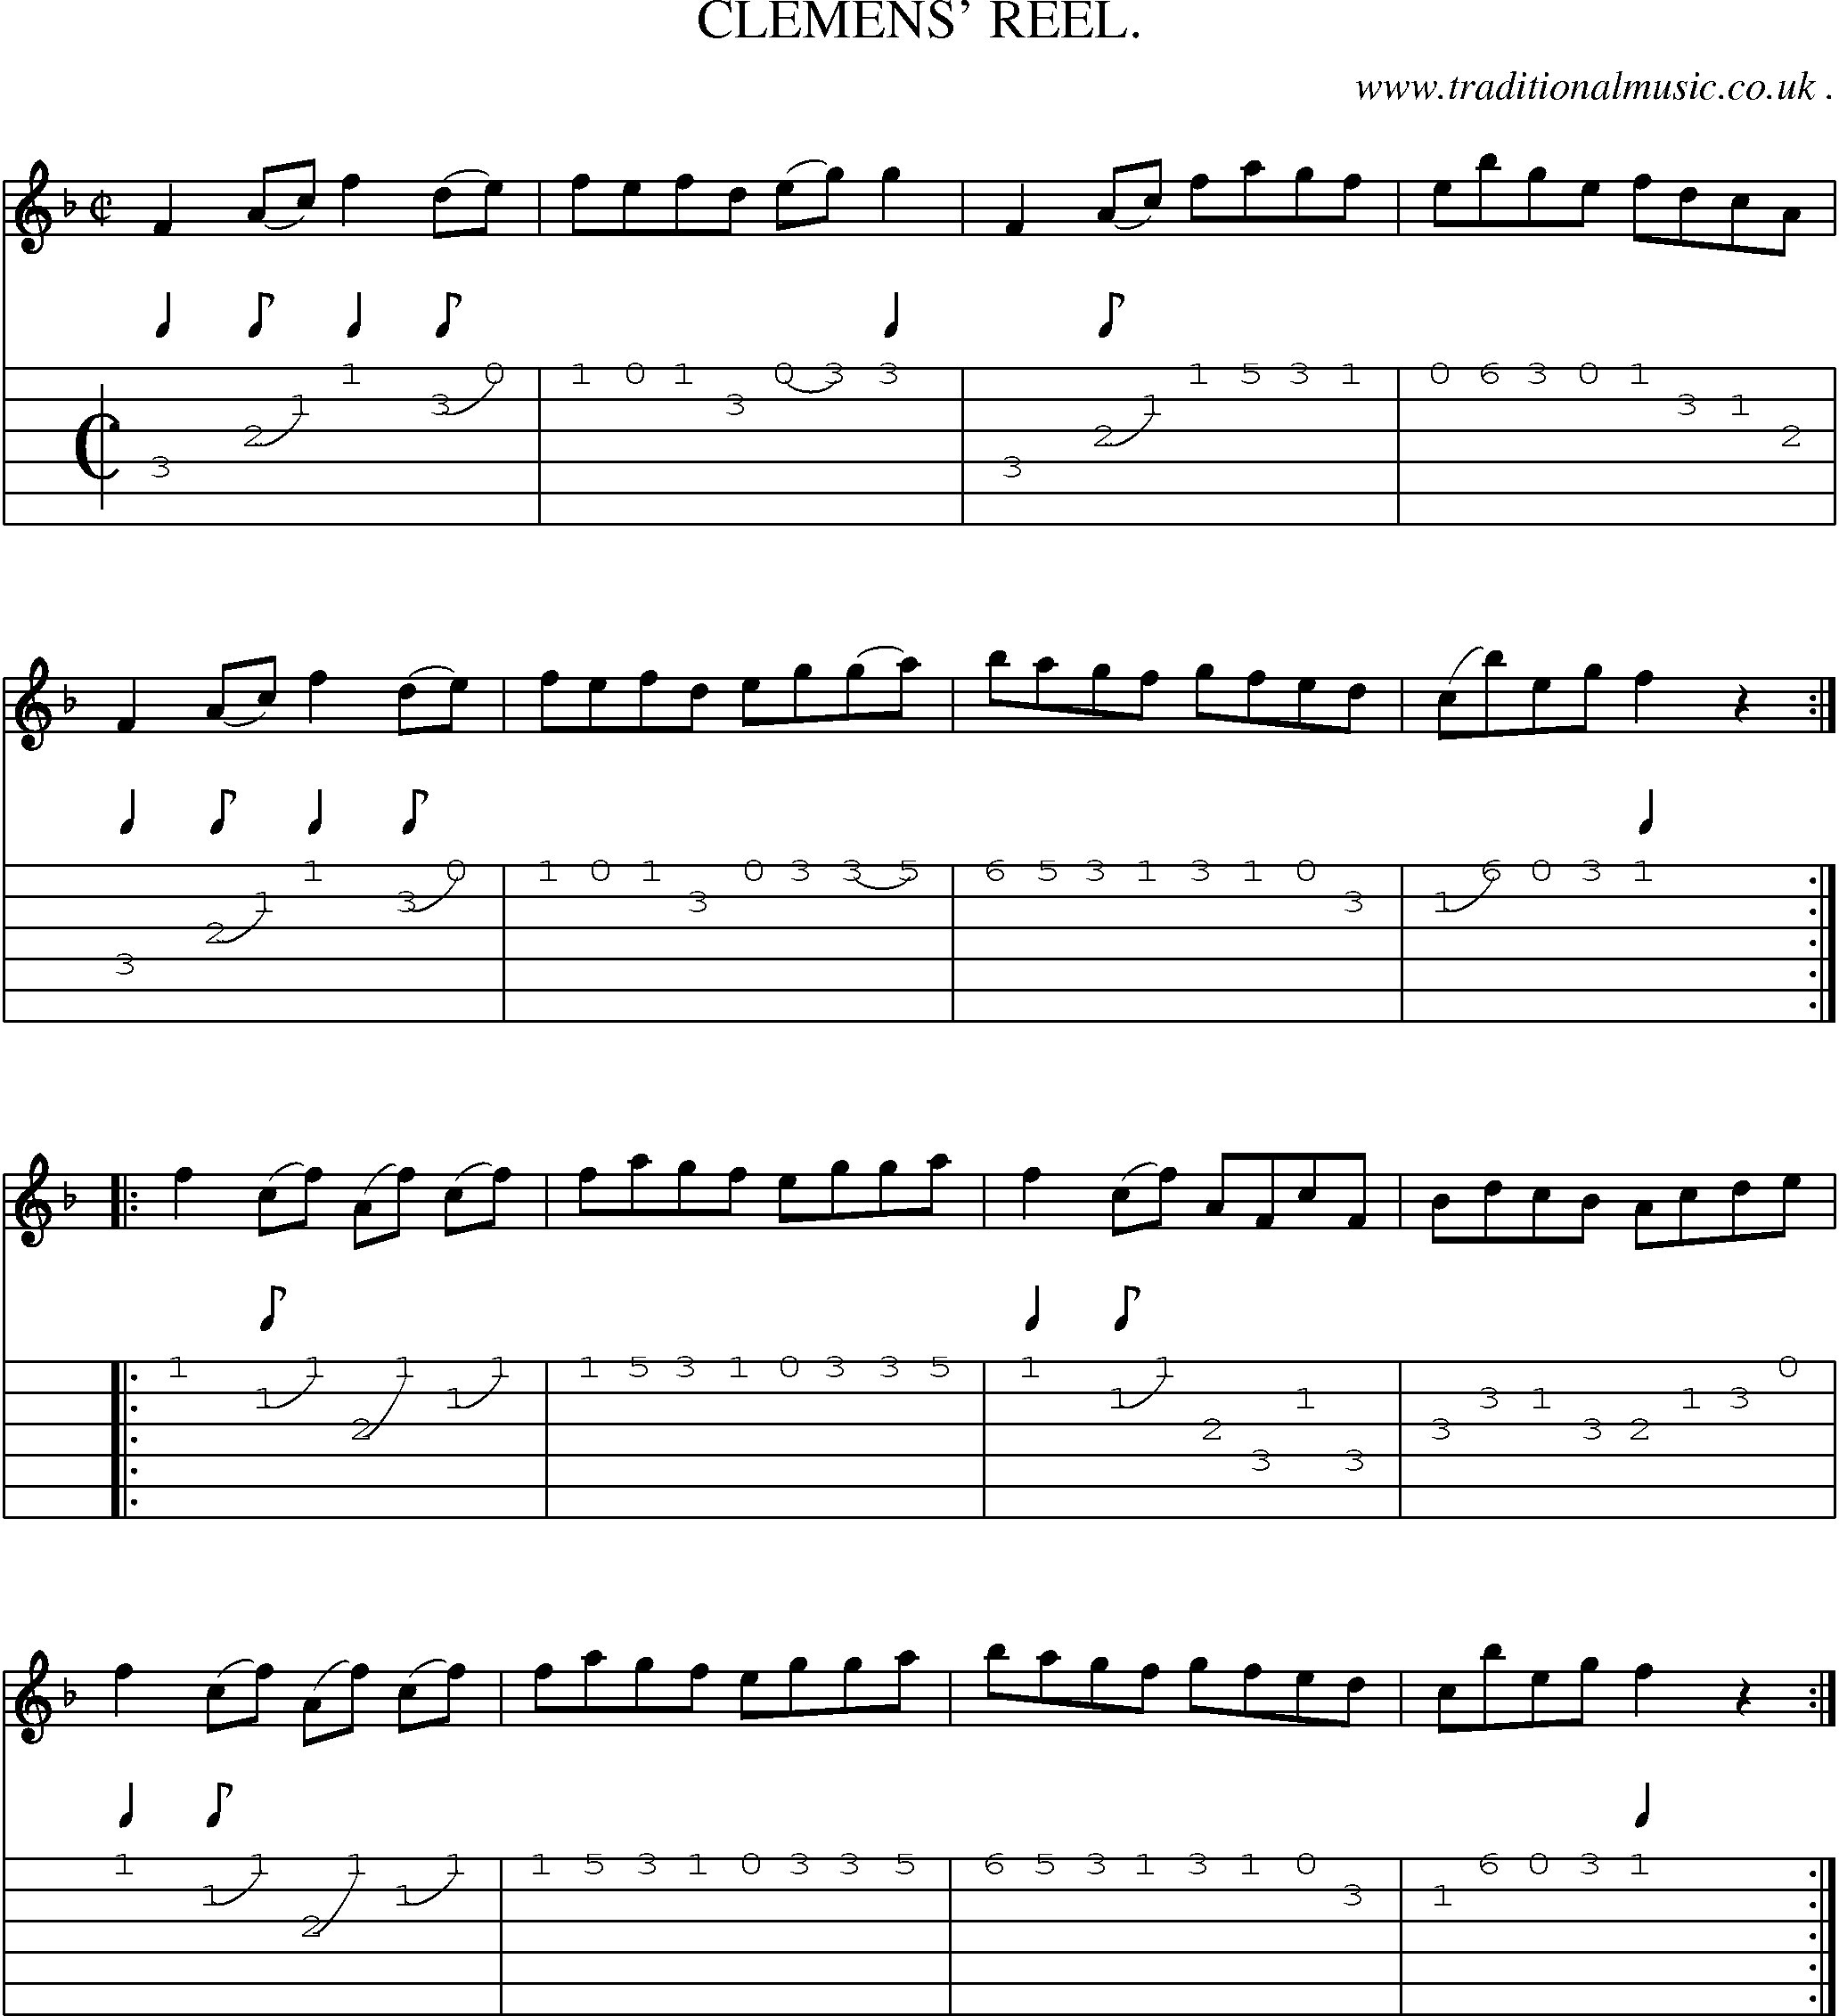 Sheet-Music and Guitar Tabs for Clemens Reel